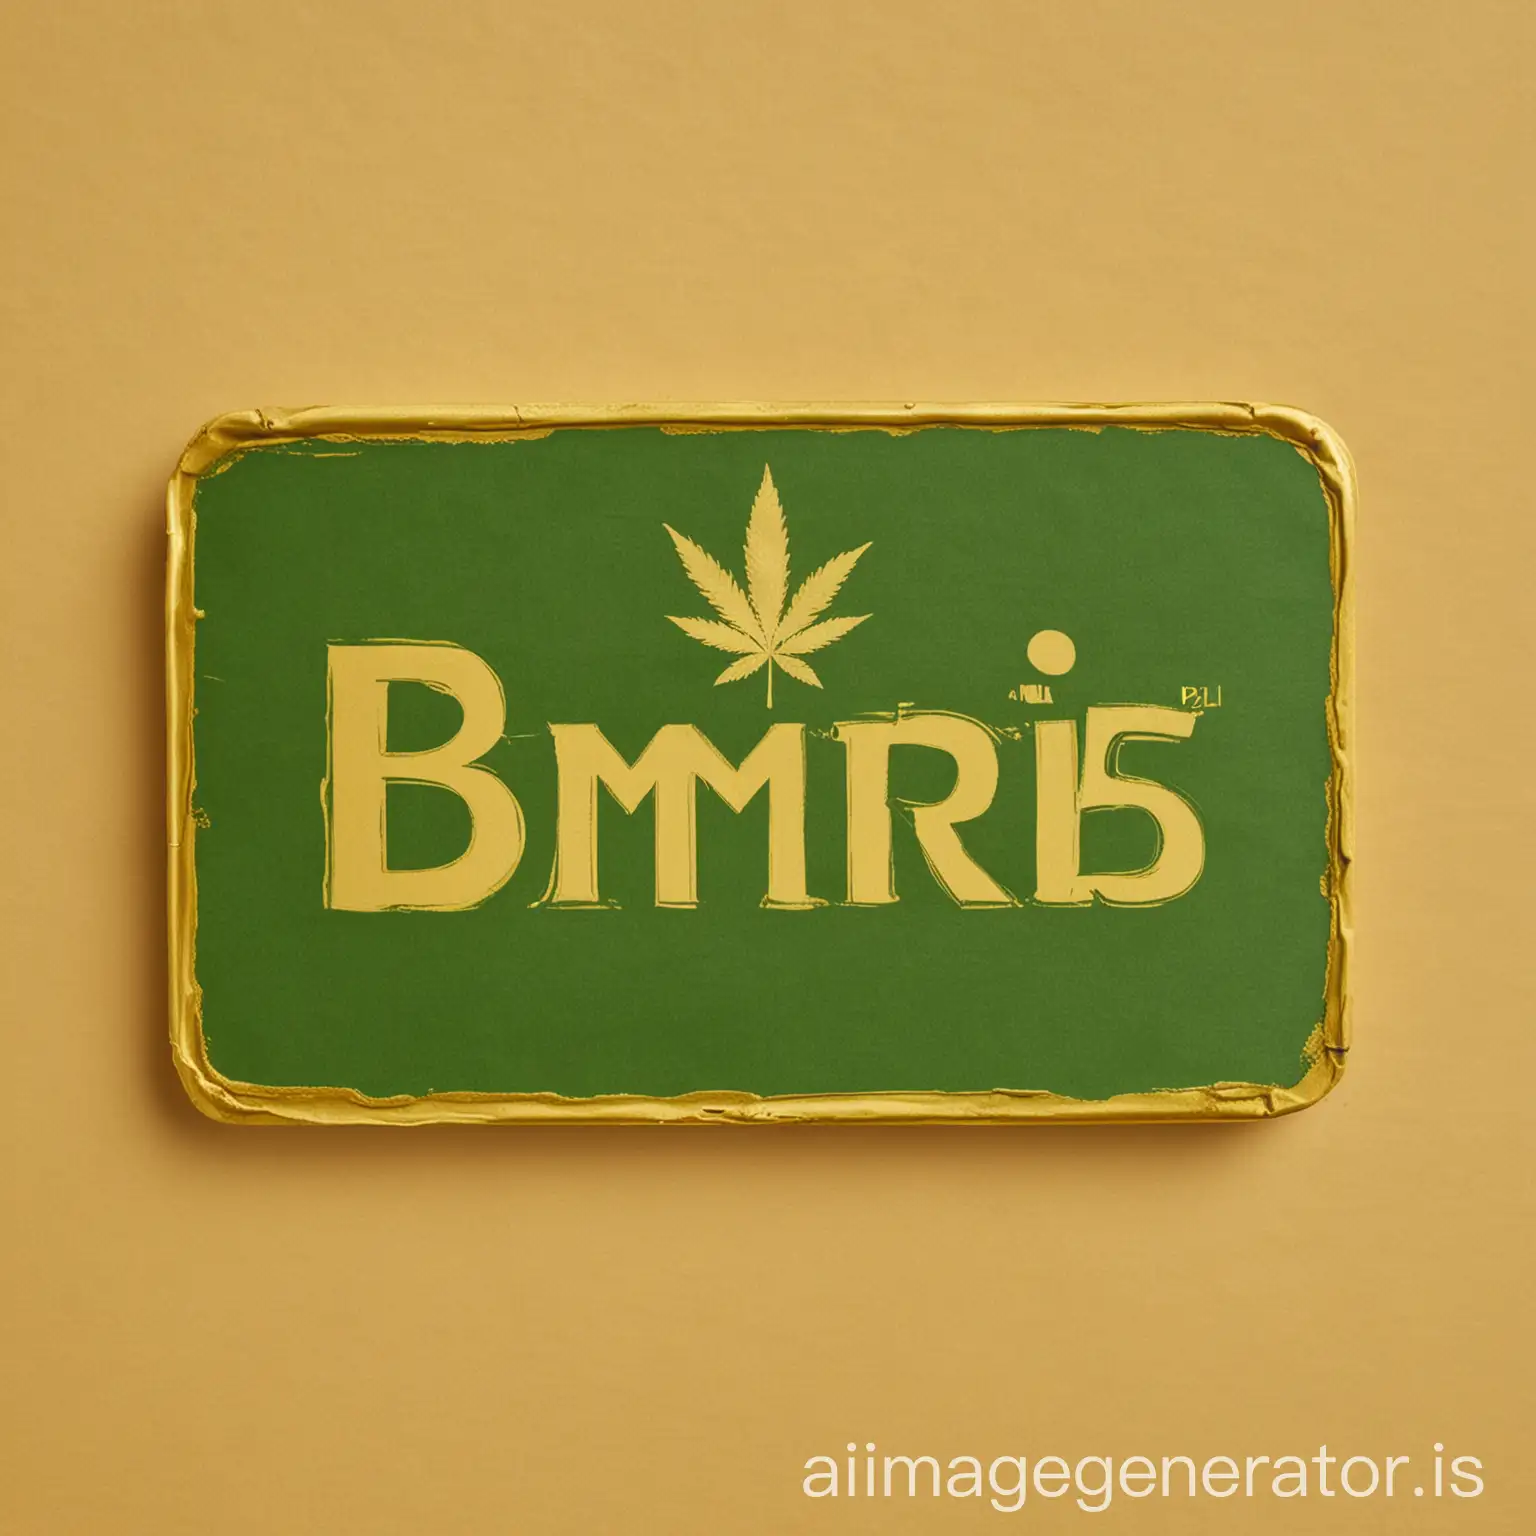 A rectangular logo: a cannabis leaf green, golden-yellow background, base of leaf stock makes with the word “BMPL” green, leaf angle 45 degree left to right, the length to width ratio of the leaf and rectangle is 1.68